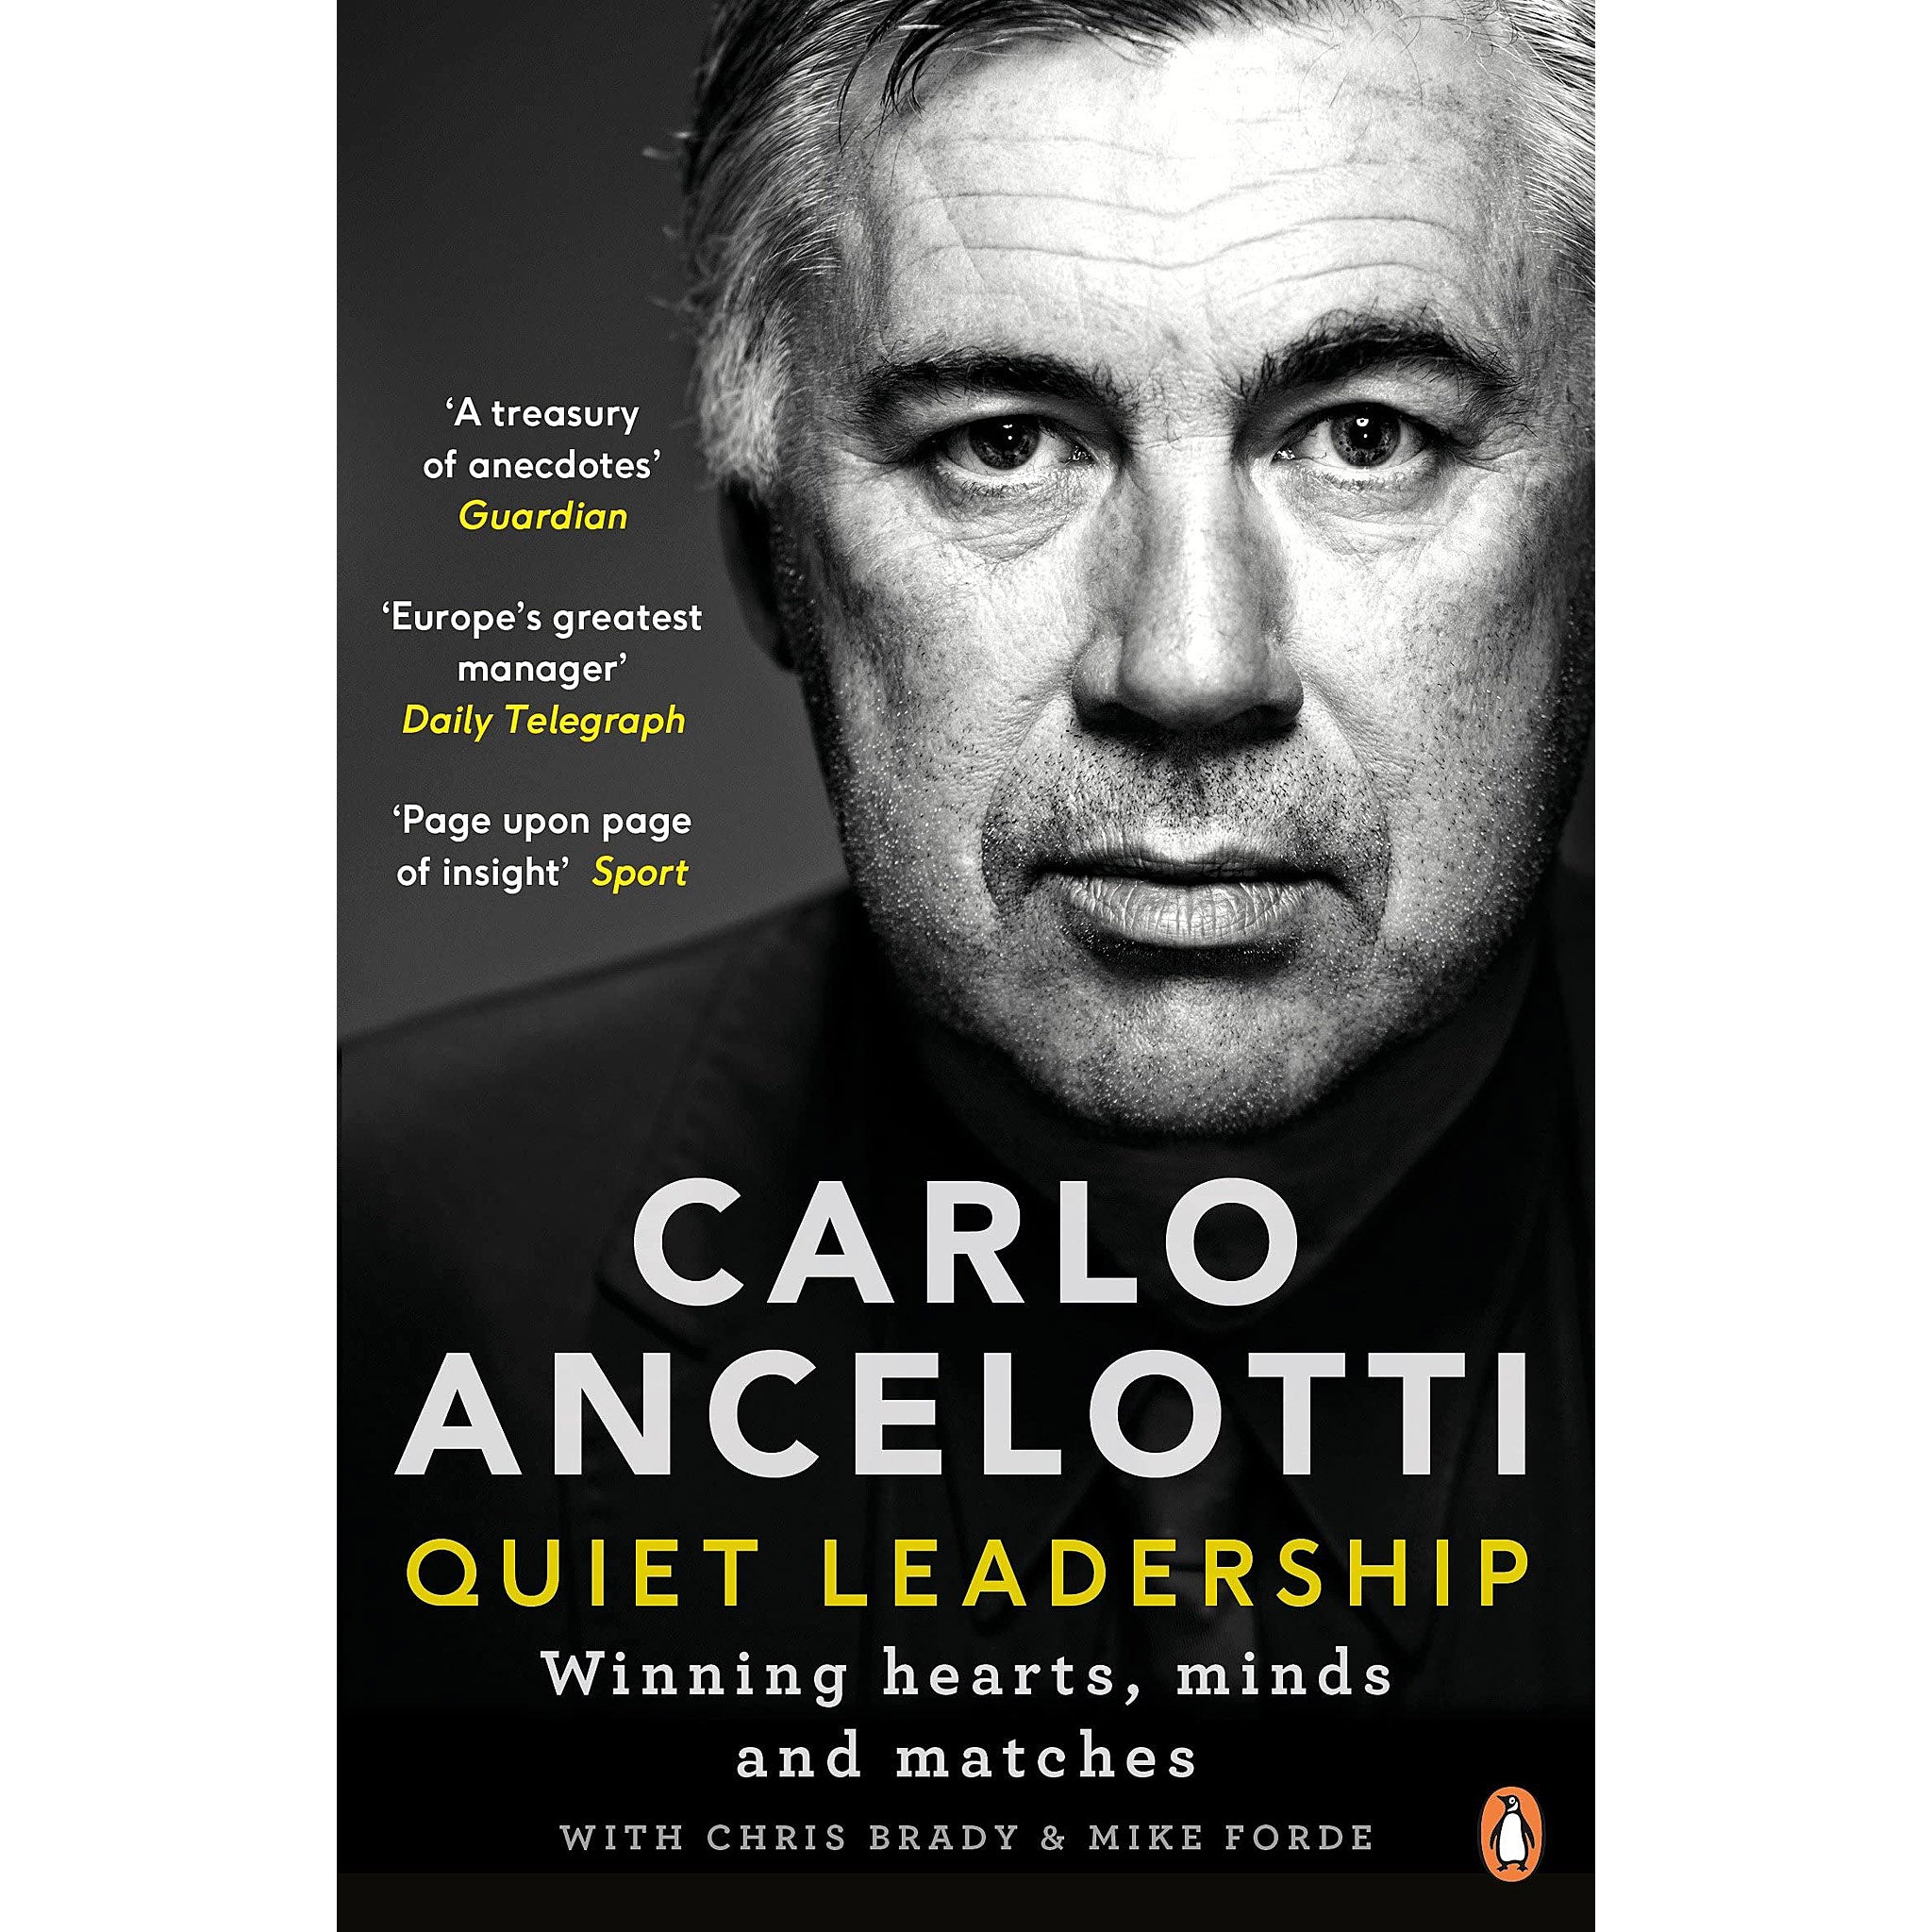 Carlo Ancelotti – Quiet Leadership – Winning hearts, minds and matches